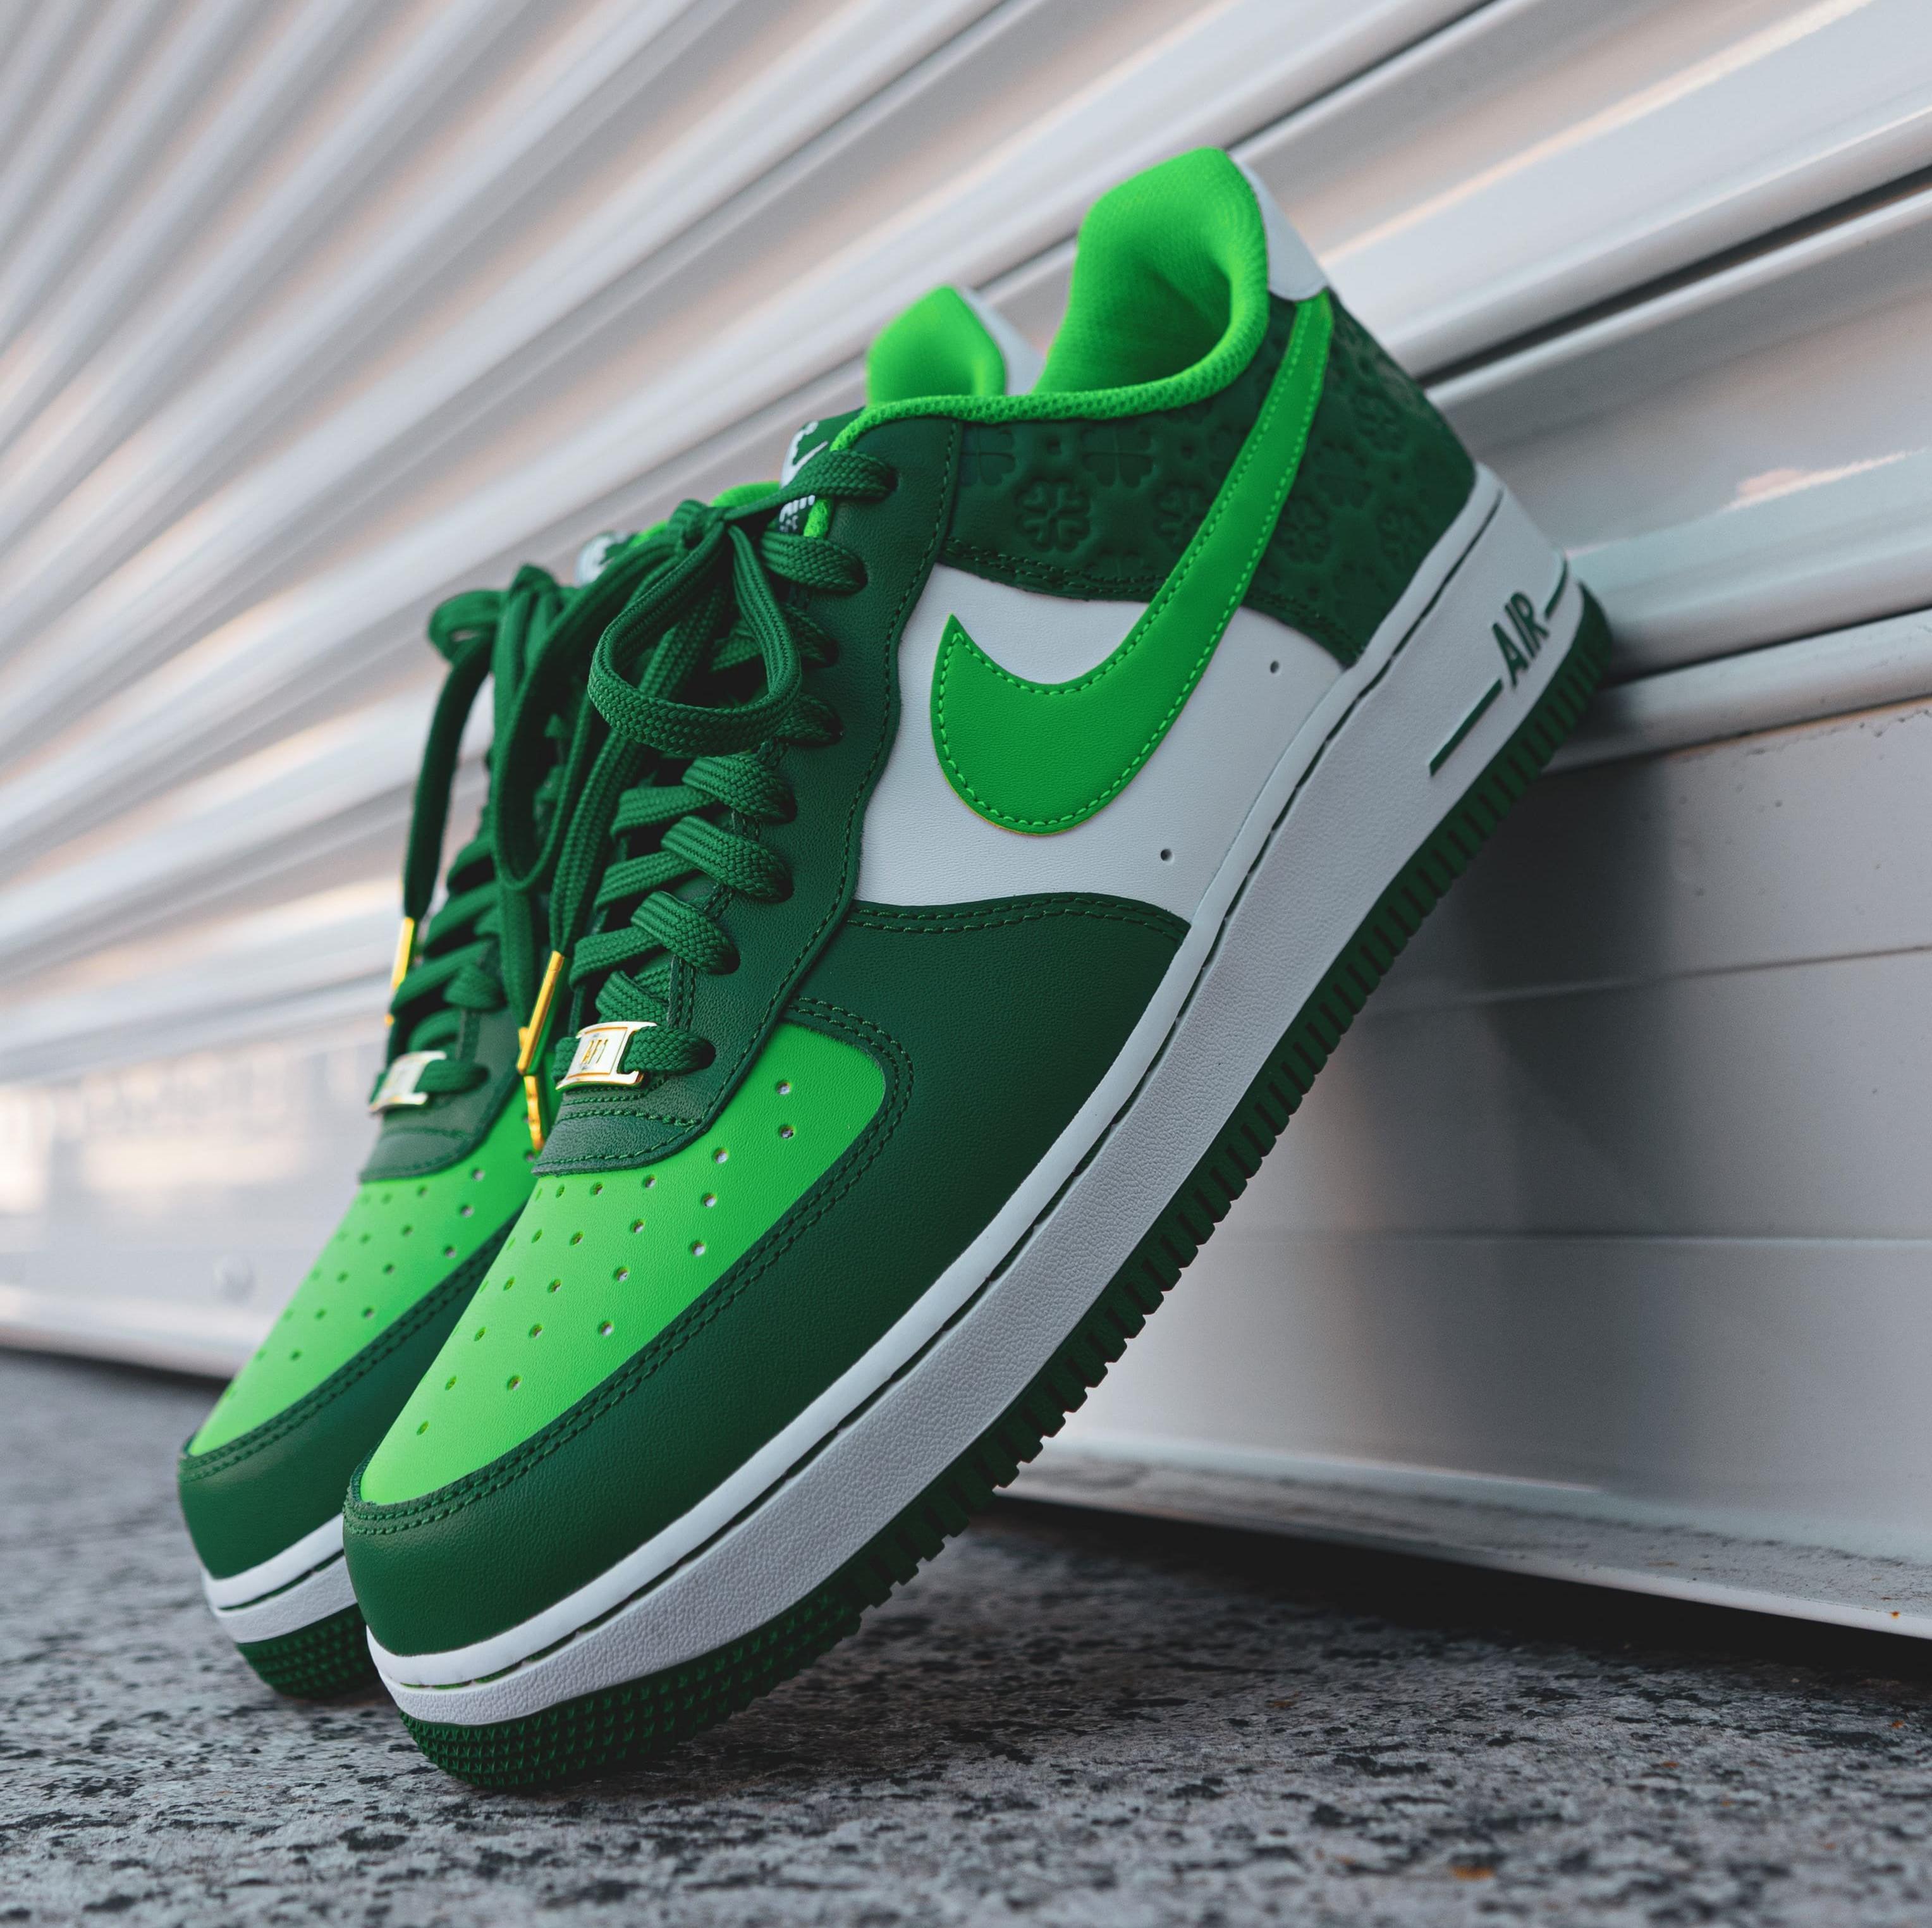 Sneakers Release – Nike Air Force 1 ’07 “St. Patrick’s Day” Drops March 12